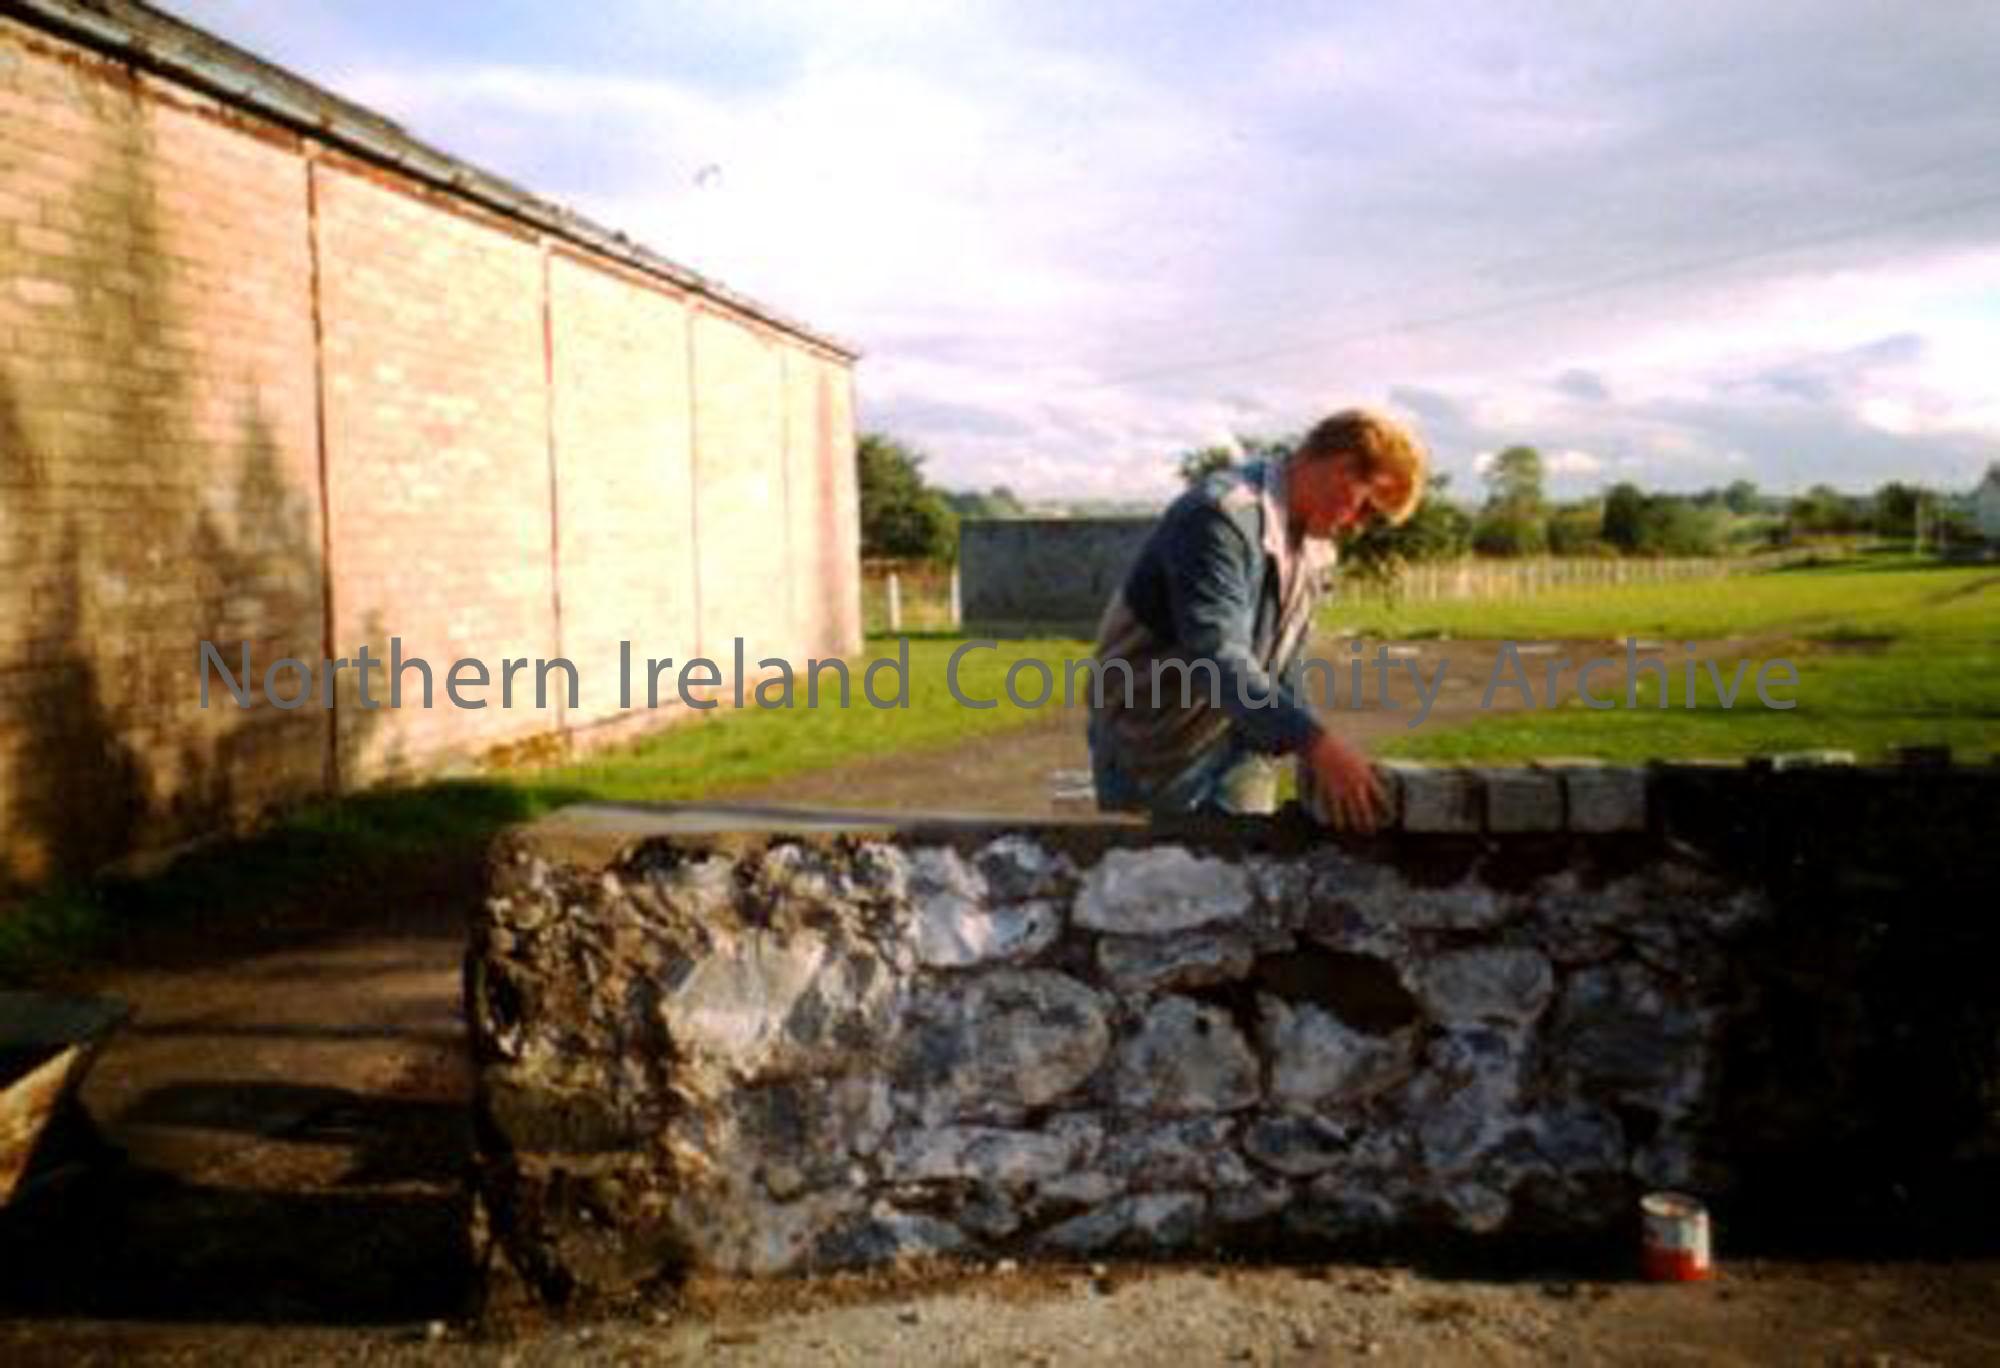 Christopher Mullholland attempting to rebuild a wall painting of King William III, originally built by Sandy Johnston, unfortunately it was never completed. Behind him is the old meal store, belonging to the Dervock Co.